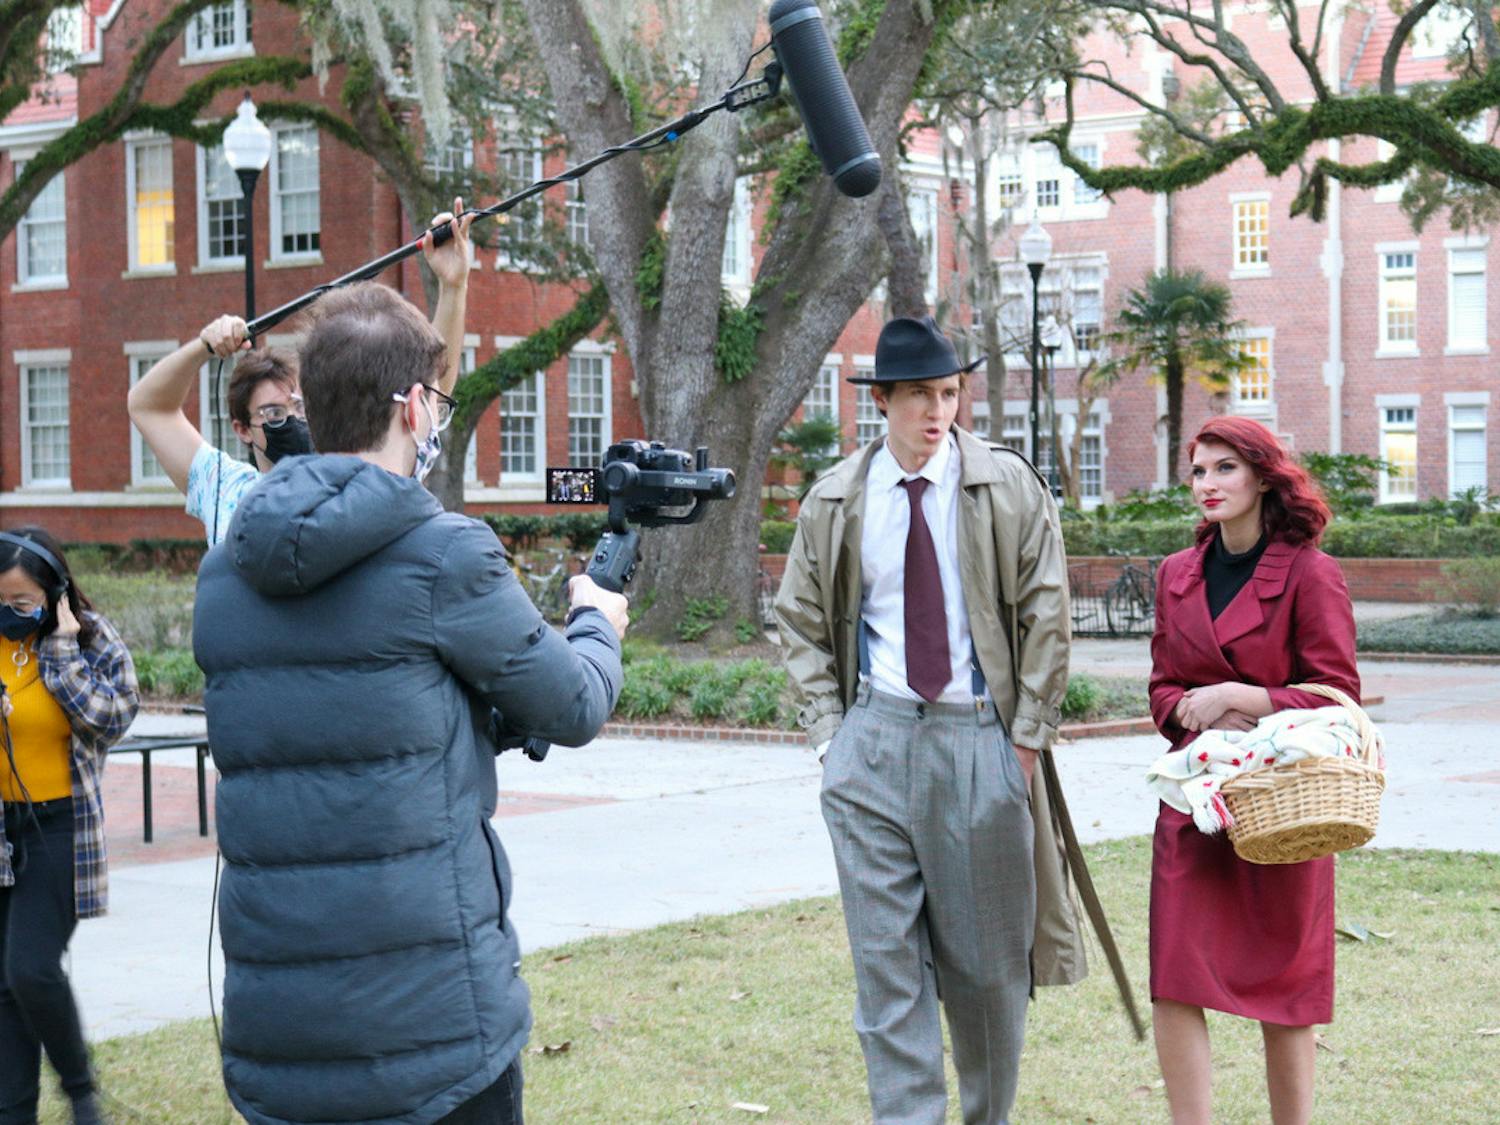 Filming of "Foundations of Crime Solving" on UF's campus February 20. (Photo by Emilee Ford)